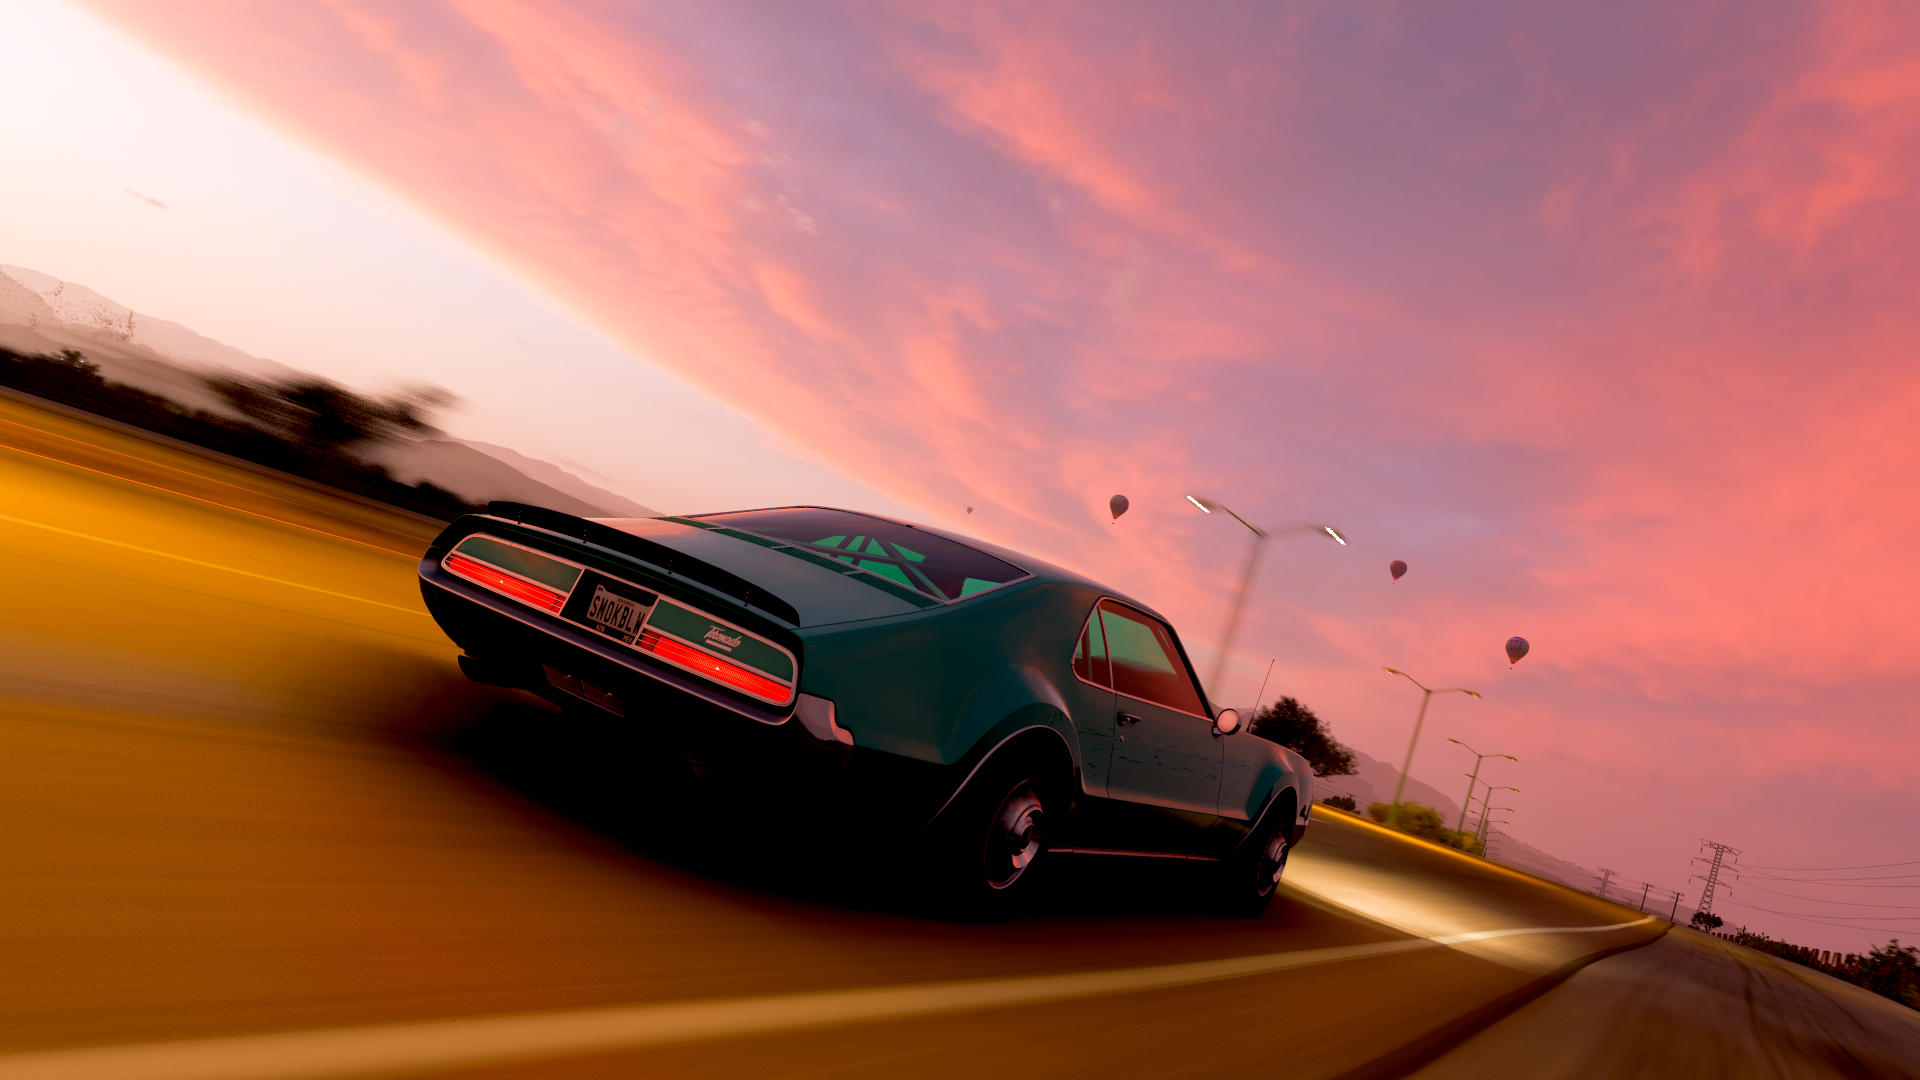 General 1920x1080 Forza Horizon 5 screen shot PC gaming Oldsmobile muscle cars PlaygroundGames car vehicle American cars video game art clouds video games taillights motion blur blurred sunset sunset glow street light road sky headlights hot air balloons Turn 10 Studios Xbox Game Studios